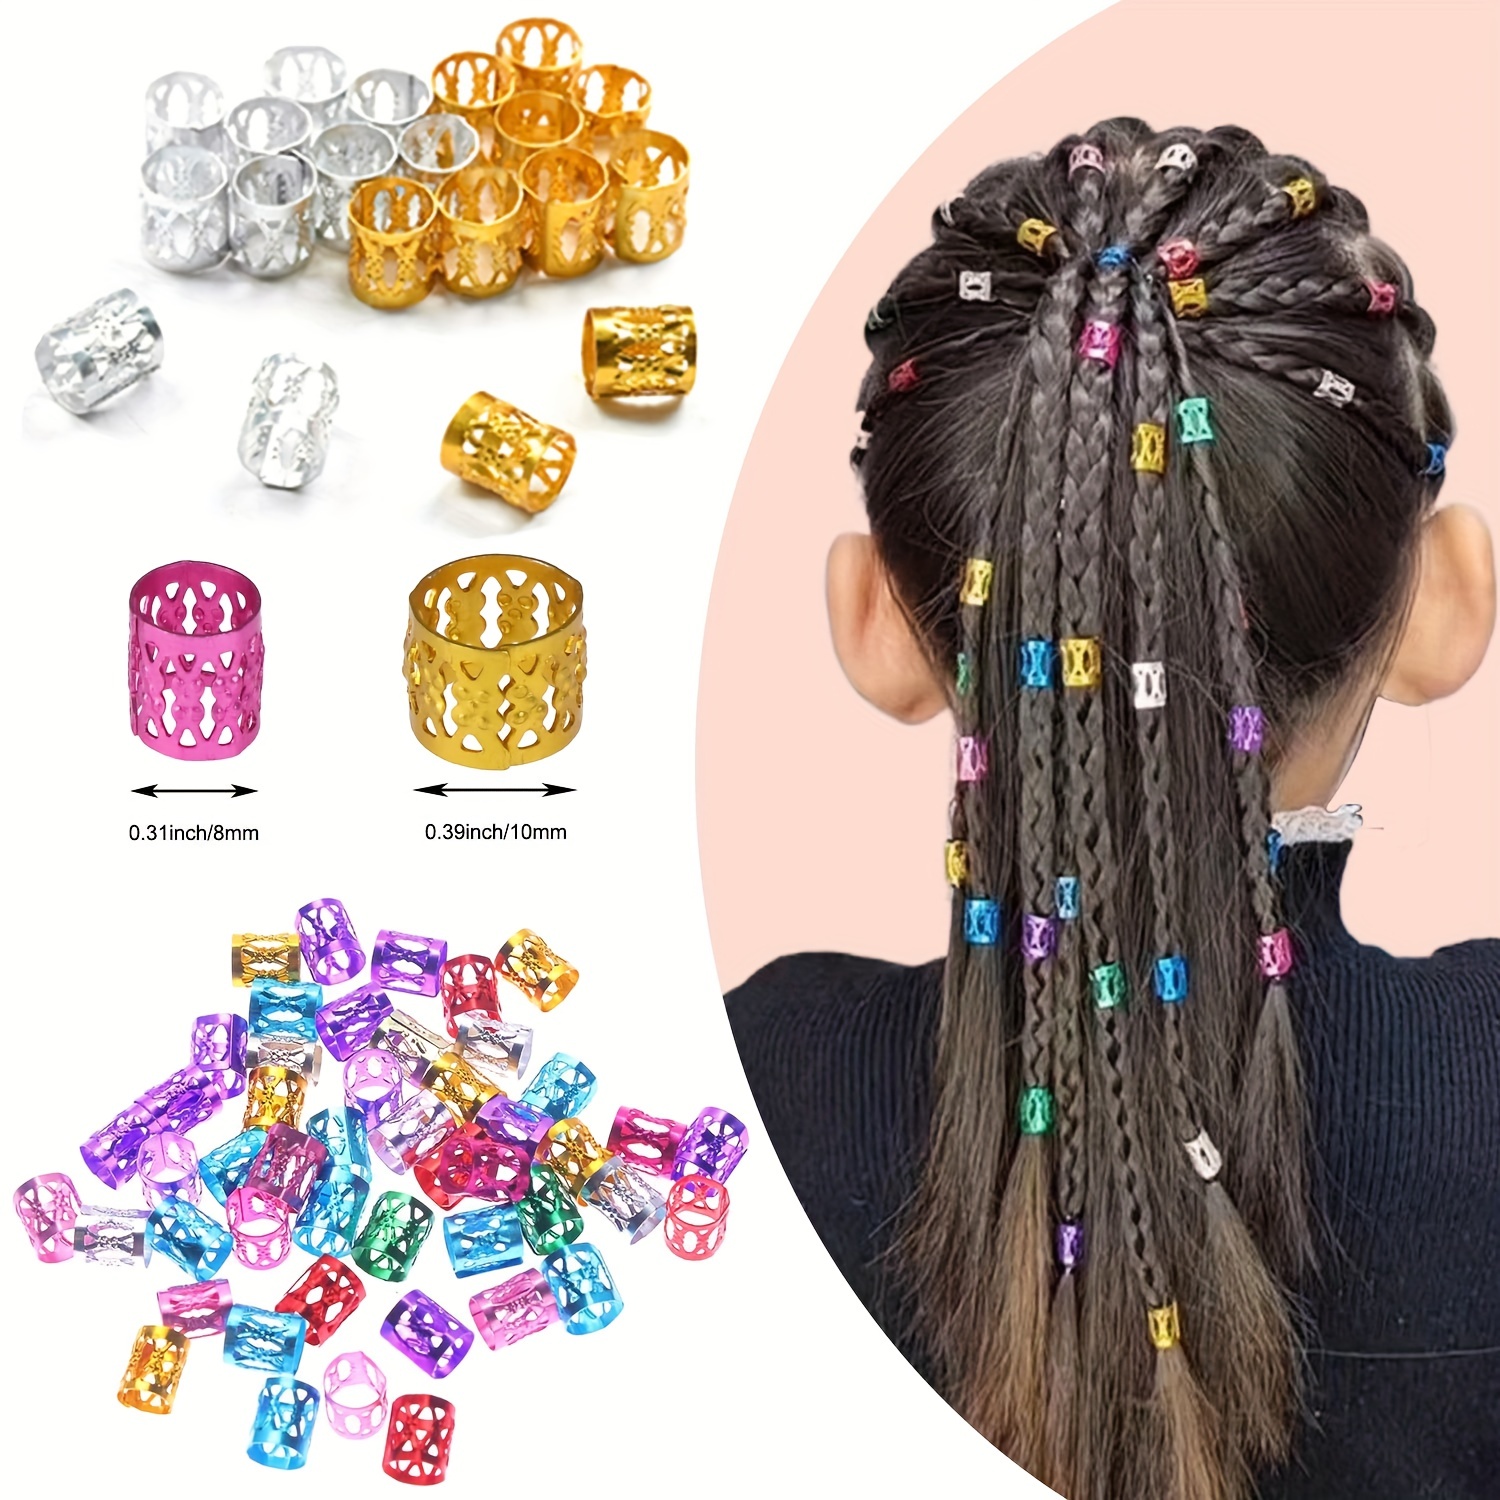  406pcs Hair Beads Set for Braids for Girls and Women Including  200pcs Clear Hair Beads for Braids for Kids,200pcs Elastic Rubber  Bands,5pcs Quick Beader for Hair Braids and 1Pc Rat